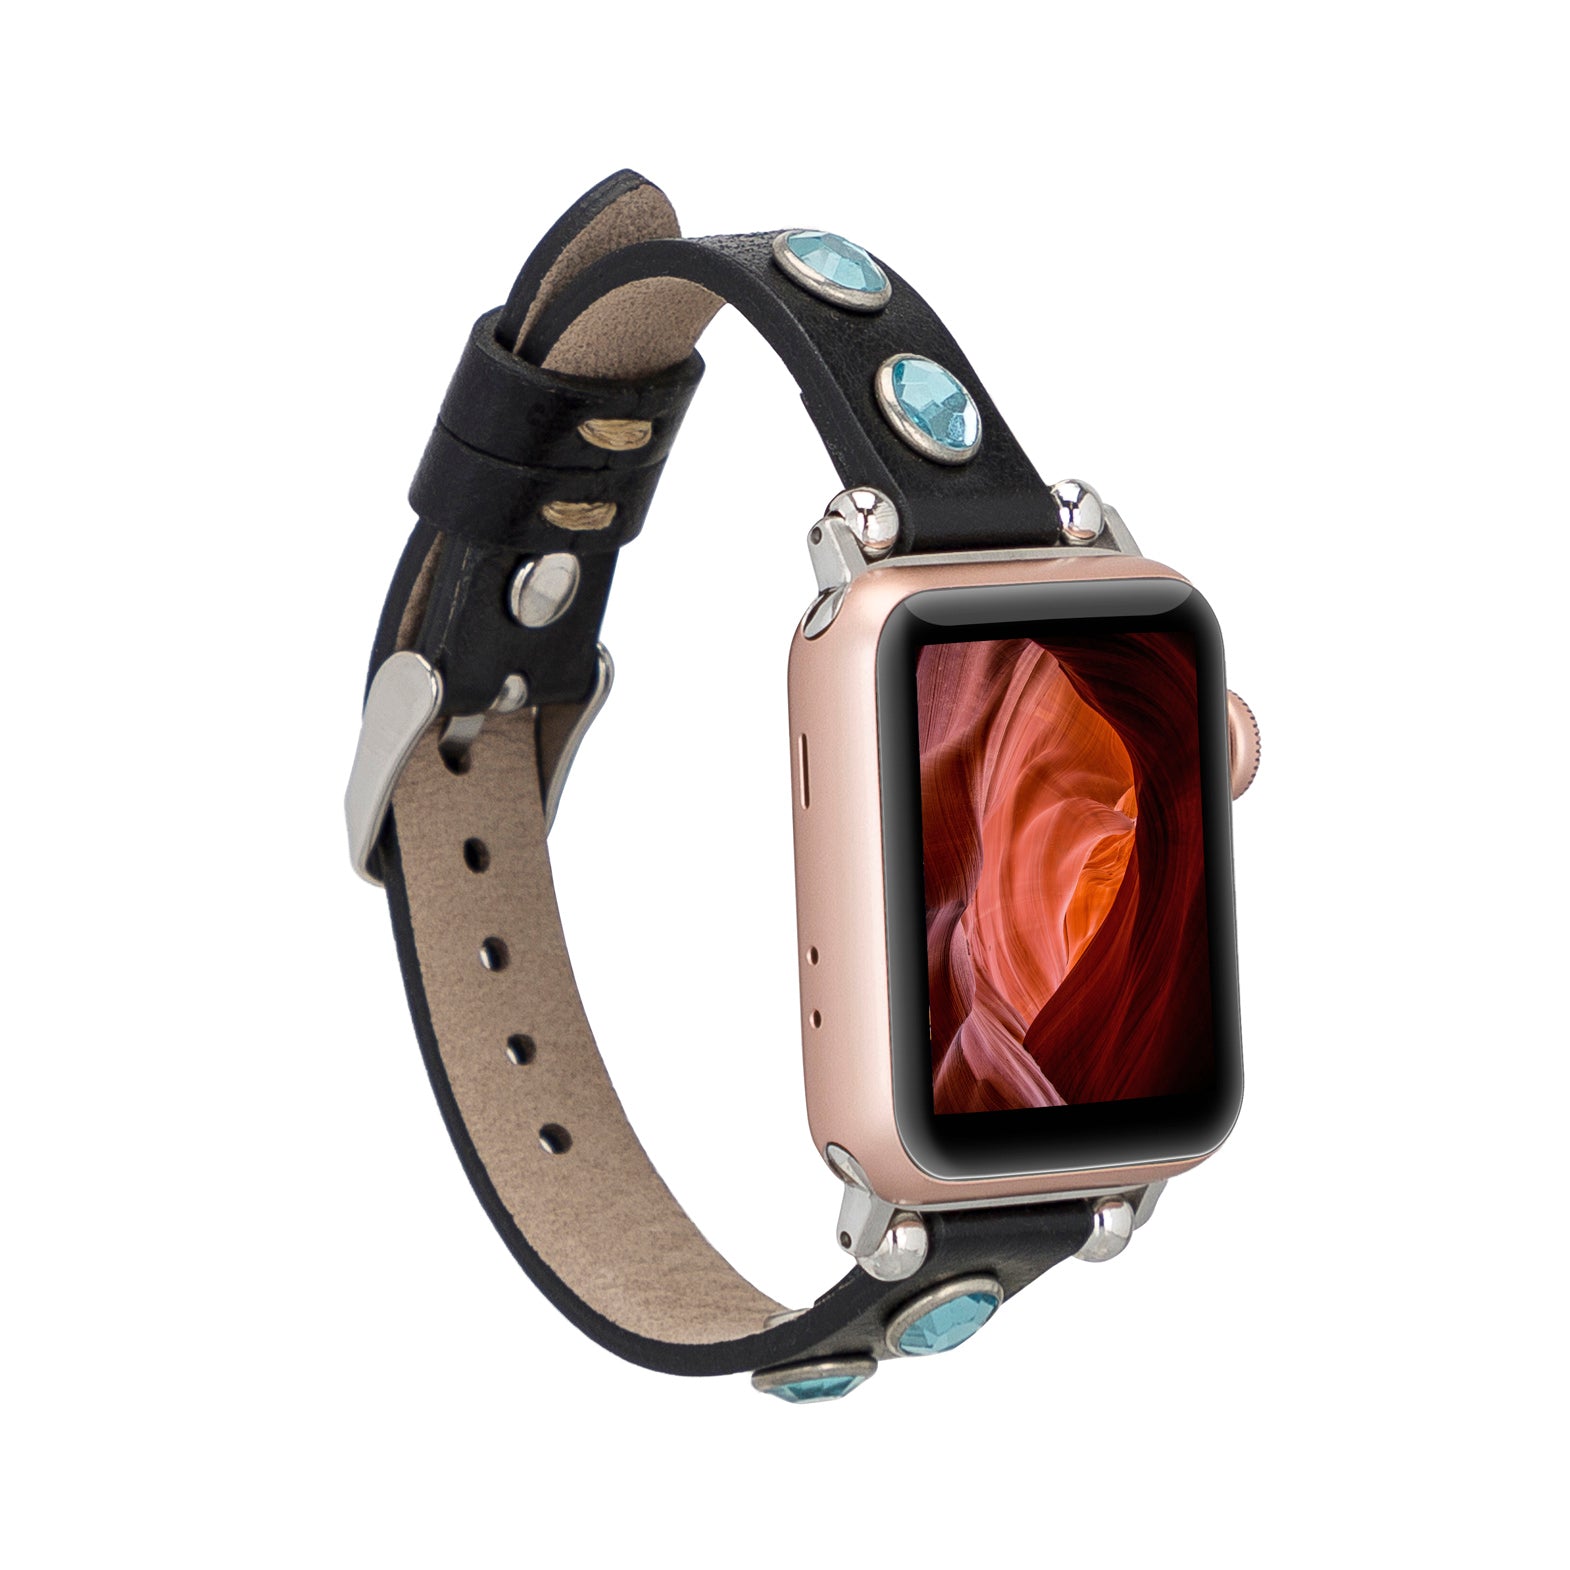 Solitaire Ferro Strap - Full Grain Leather Band for Apple Watch / BLACK